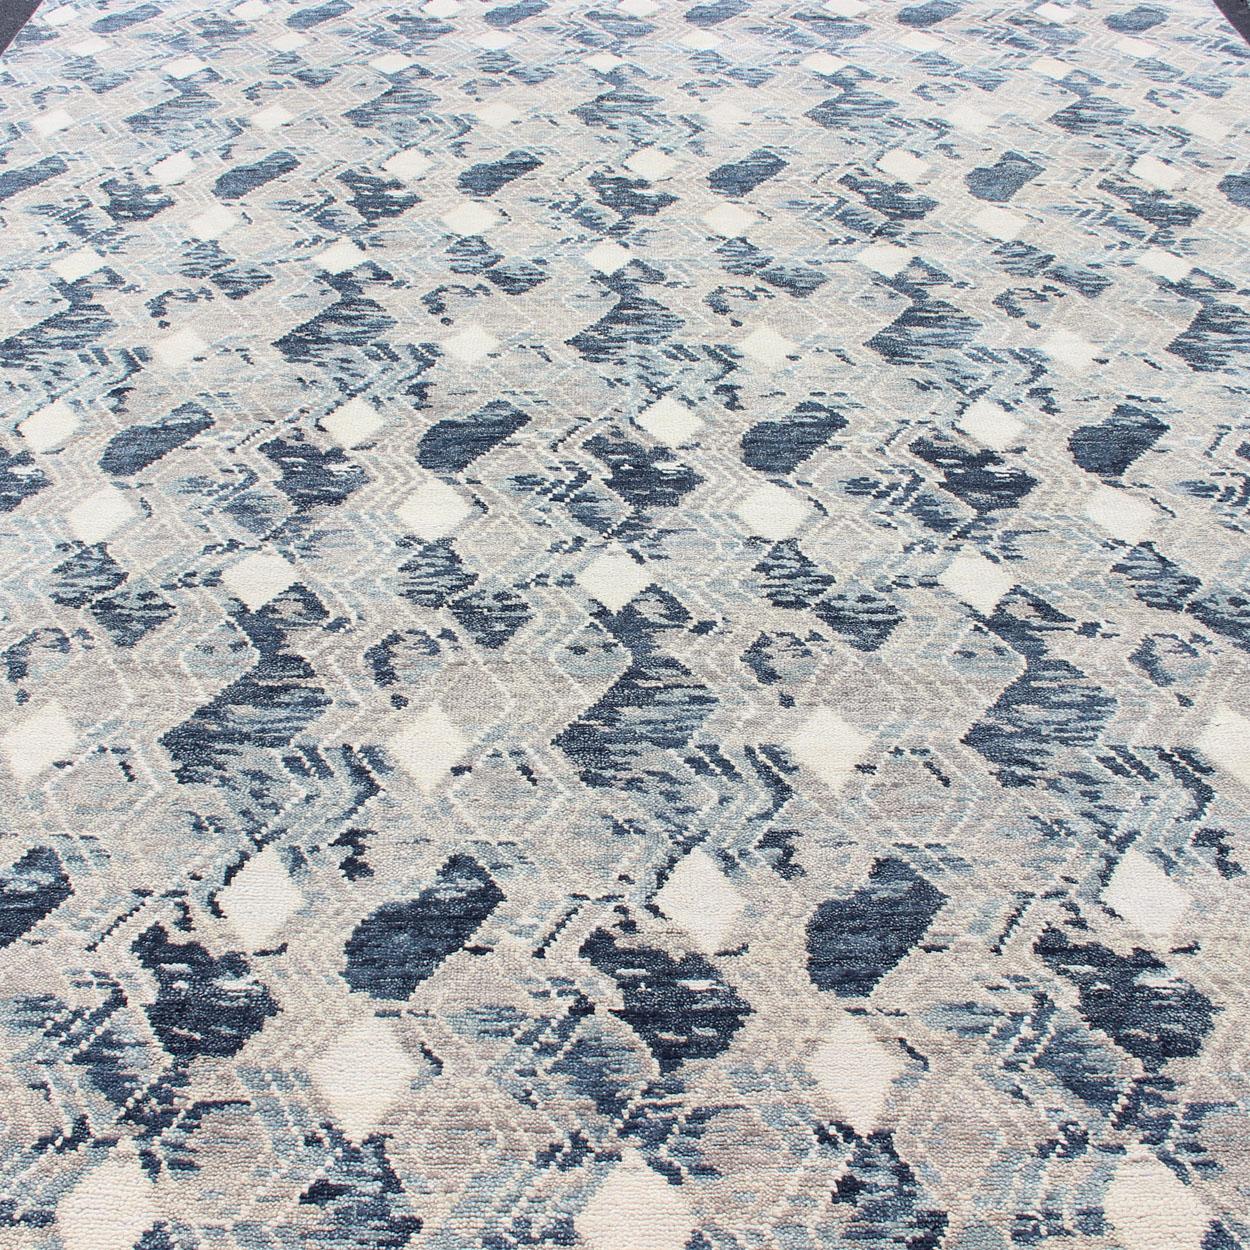 Oversized Modern Diamond Designed Indian Area Rug in Blue, Gray, and White For Sale 6